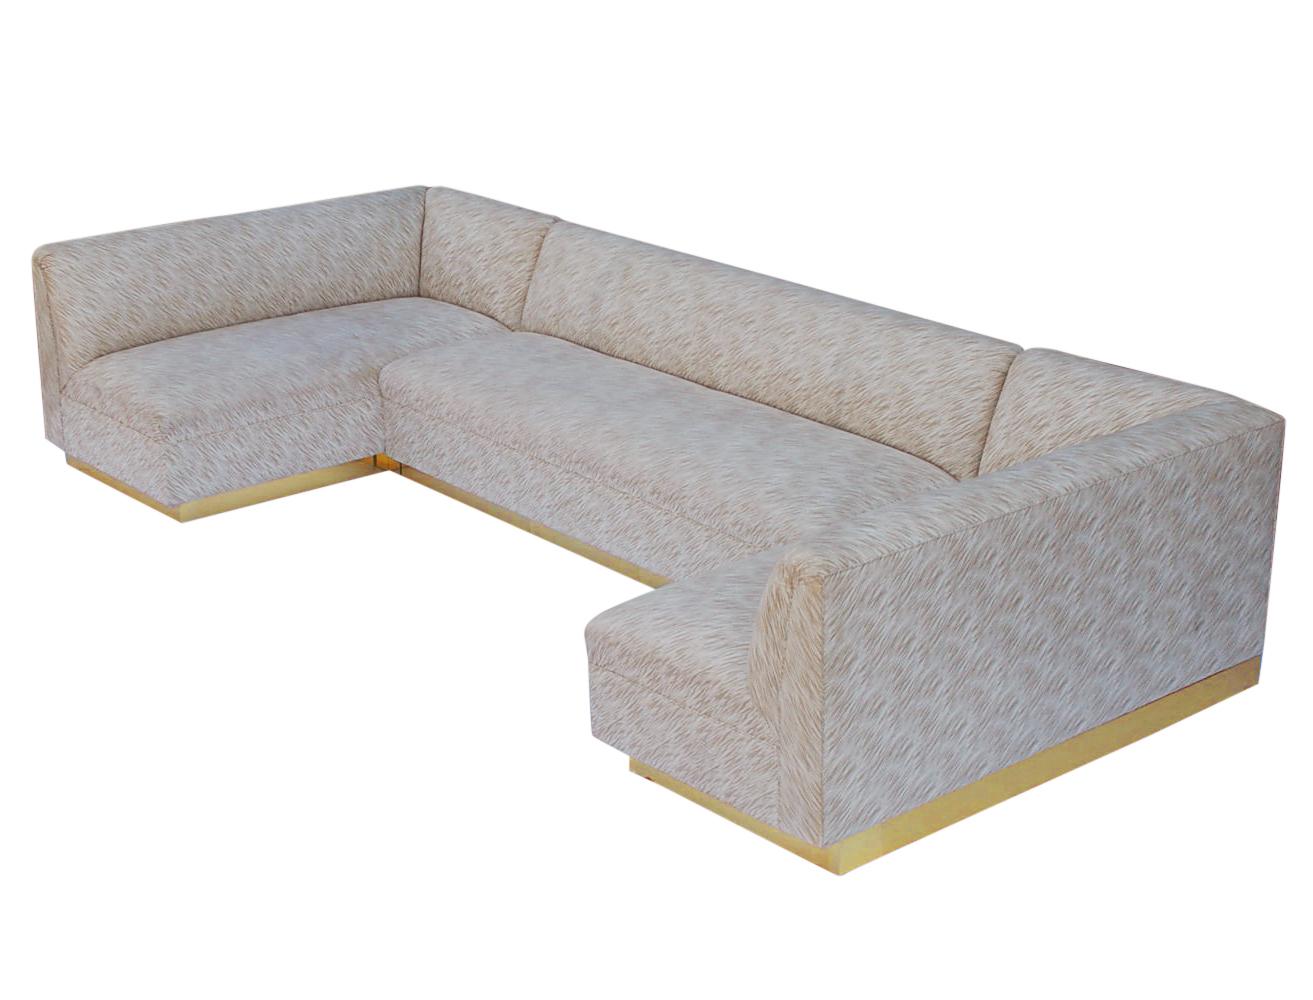 A large custom made sofa, circa 1970s. It features a three piece U-shape design with a full brass plinth base. Upholstery is original and in good clean usable condition.